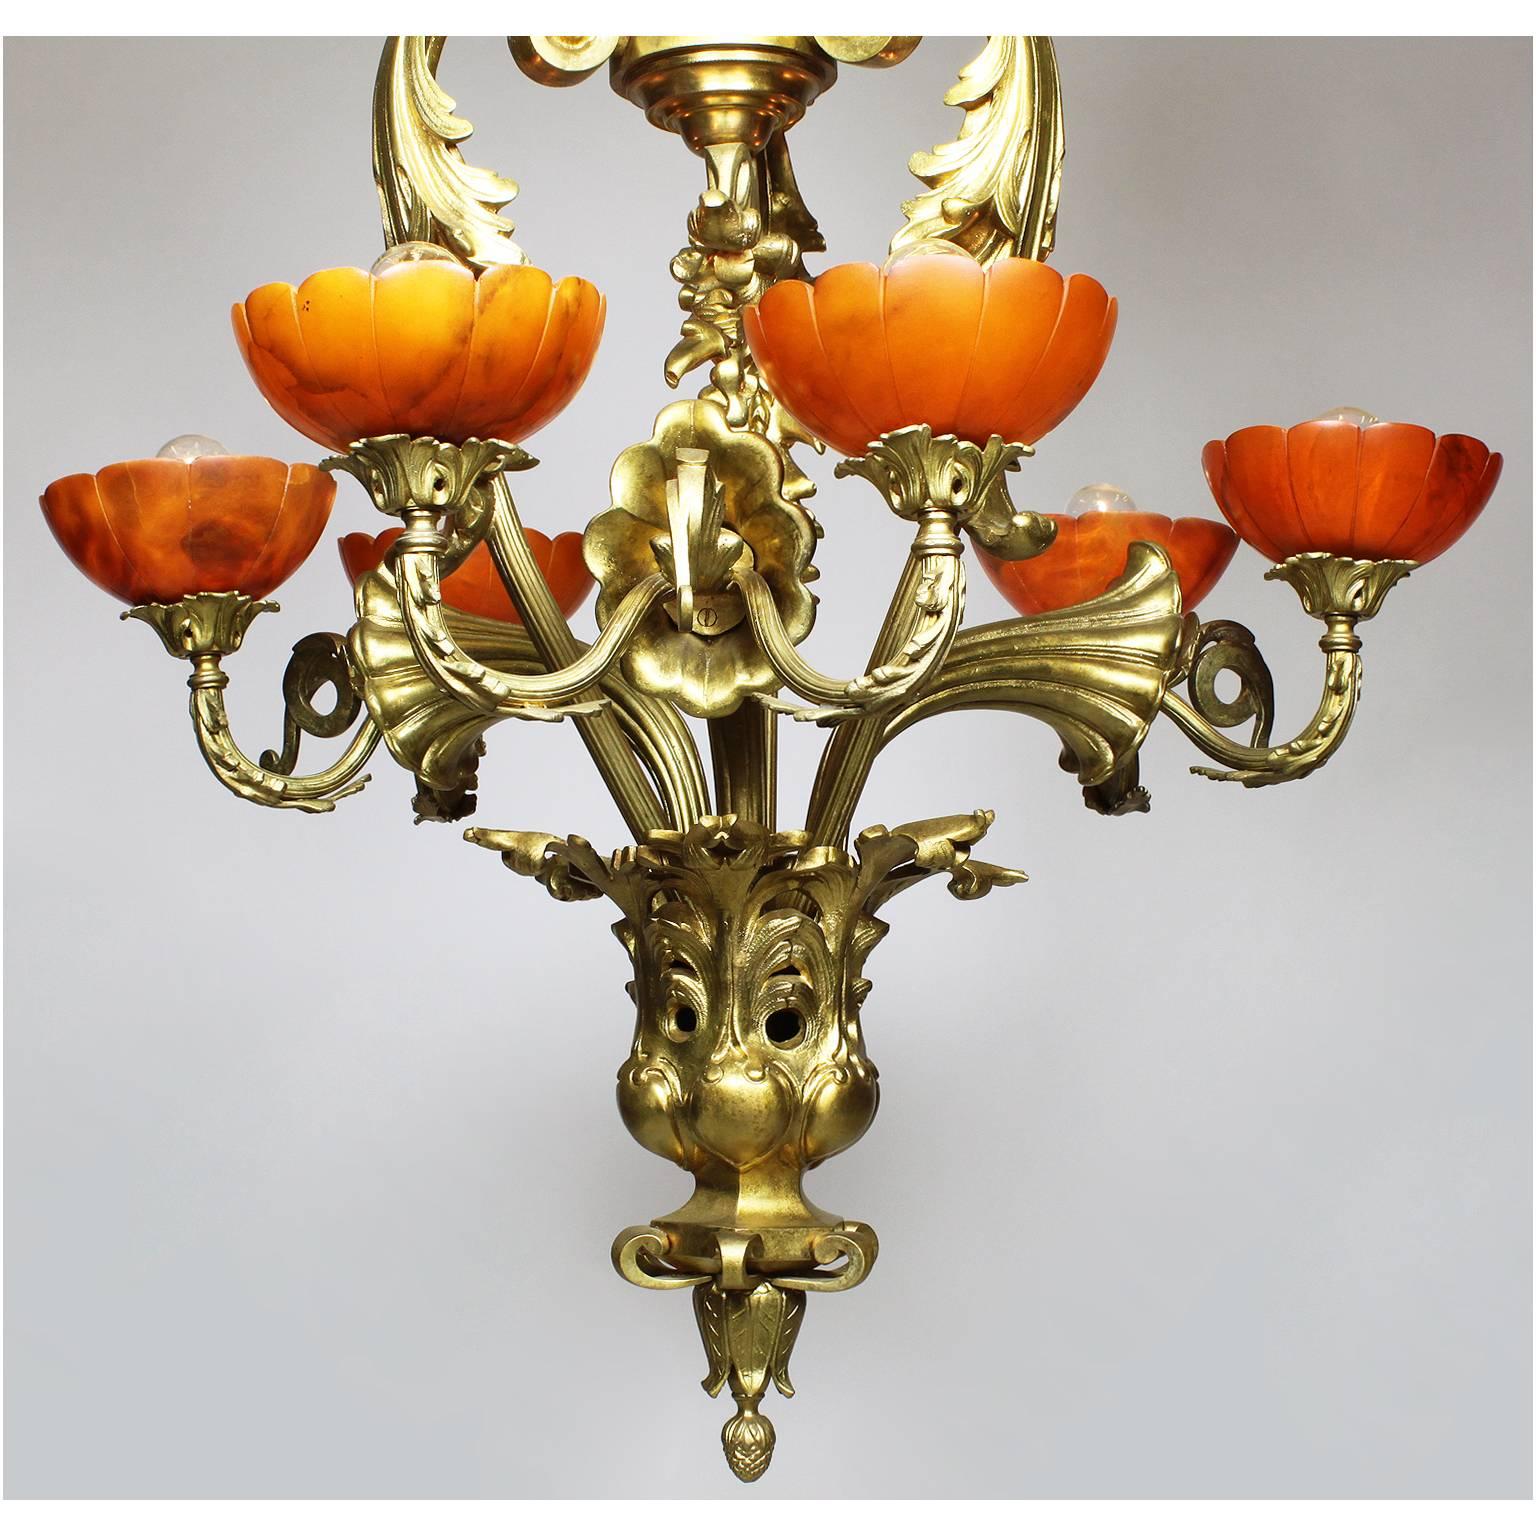 French Belle Époque Early 20th Century Gilt-Bronze & Alabaster Lilies Chandelier In Good Condition For Sale In Los Angeles, CA